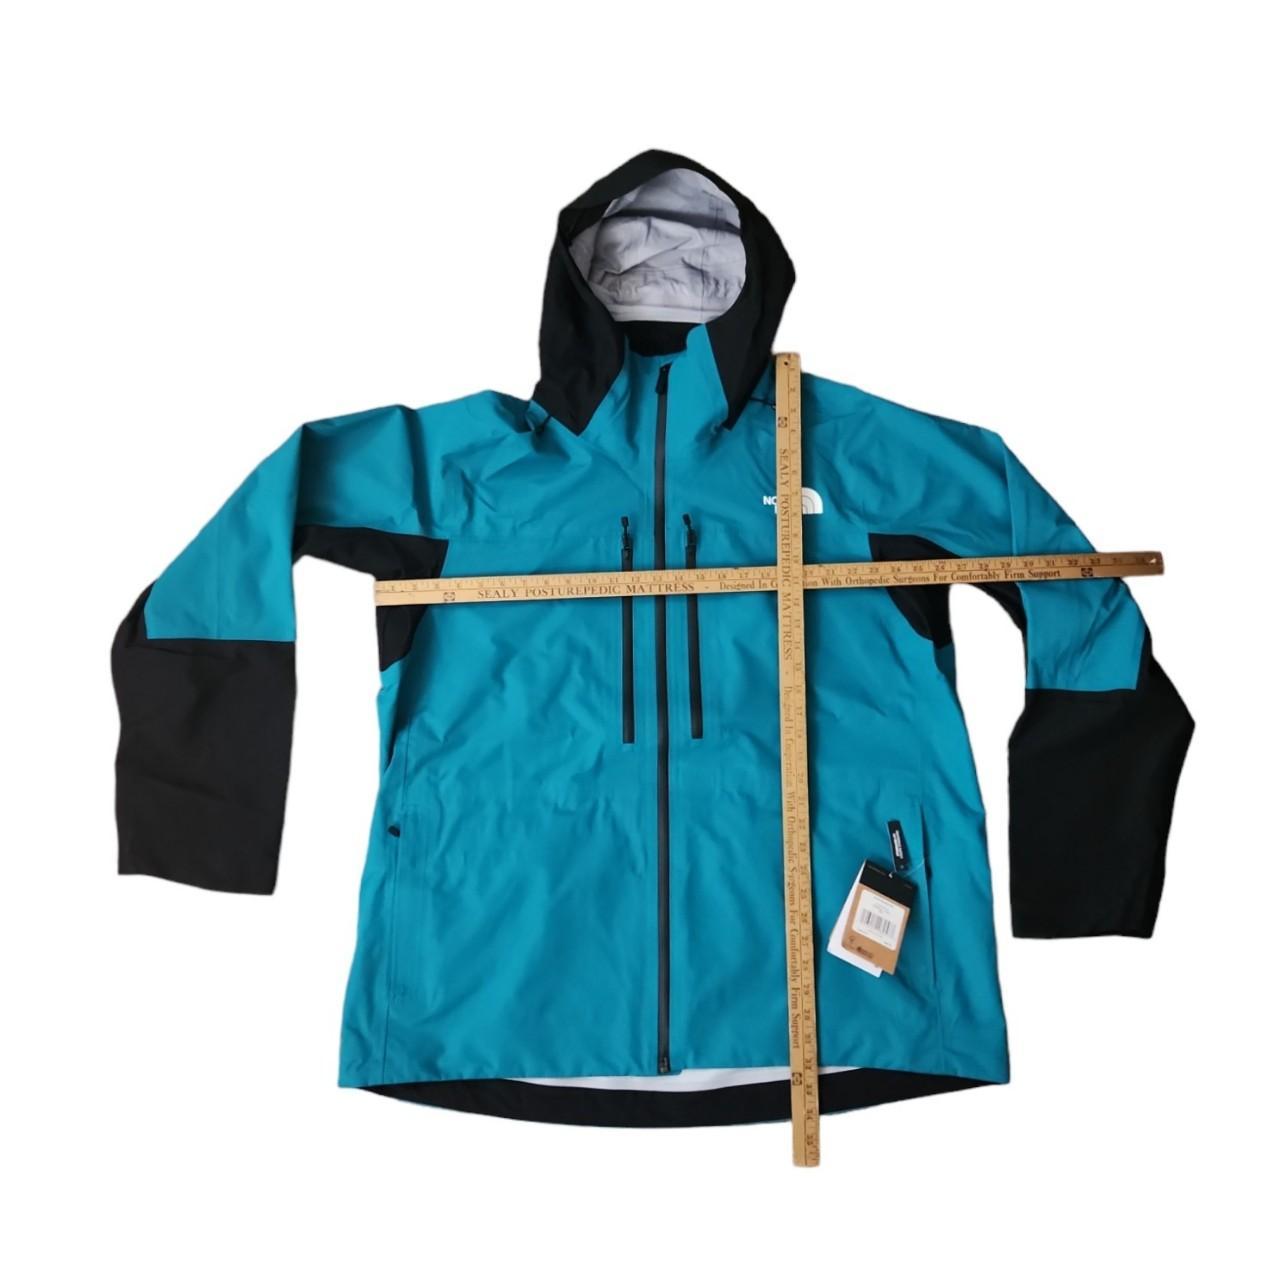 NWT $400 The North Face Ceptor DryVent Ski Snow